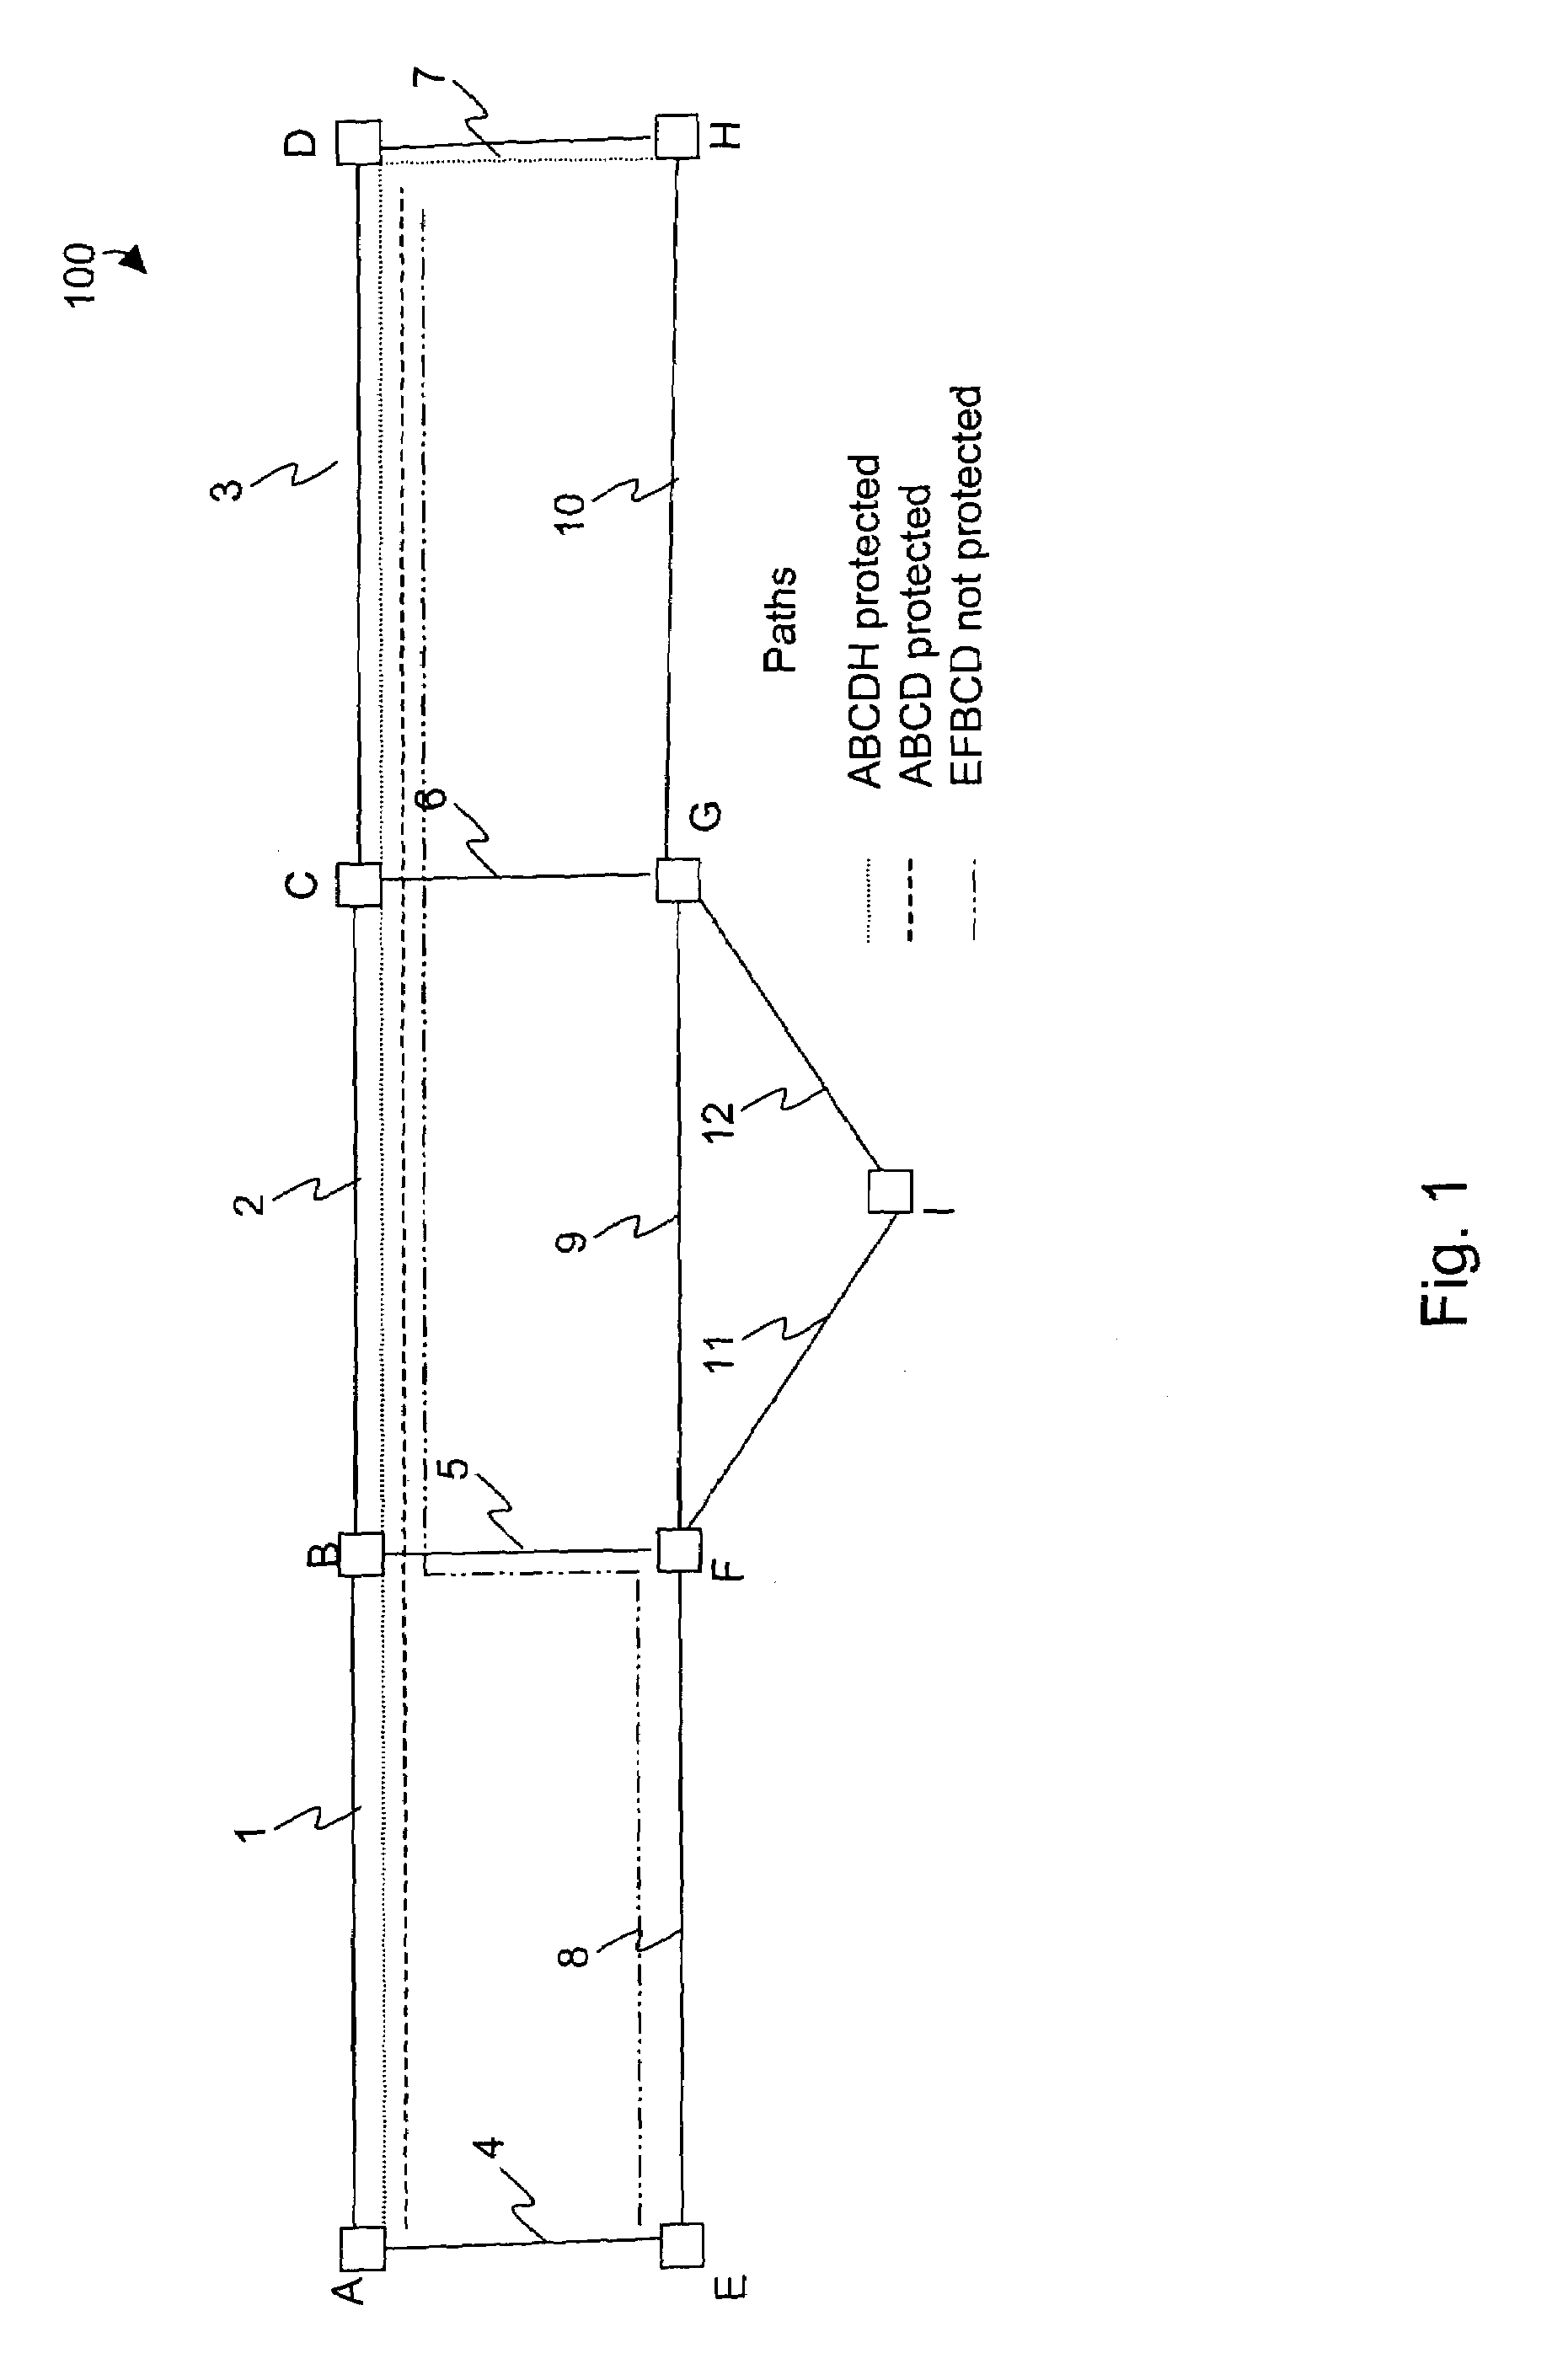 Line-level path protection in the optical layer